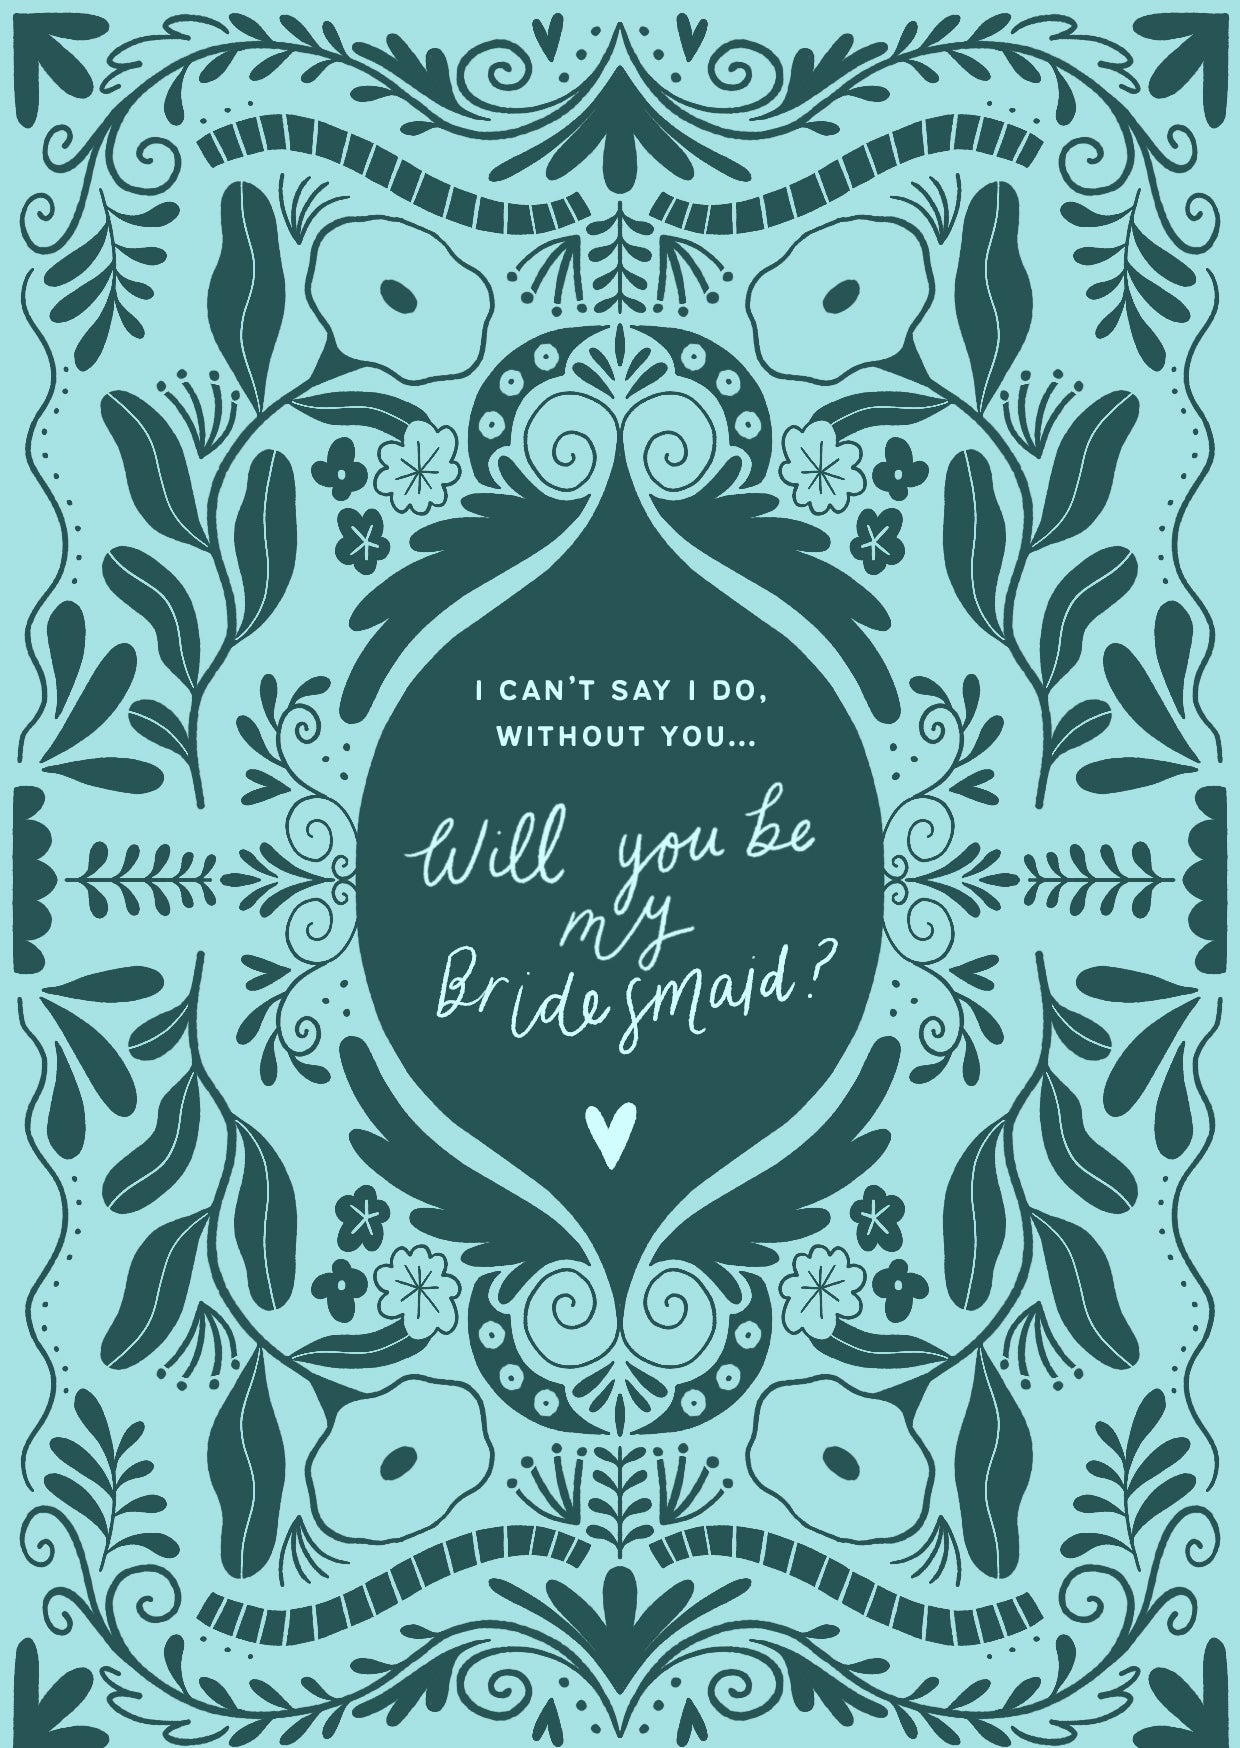 Will you be my Bridesmaid? - Symmetry